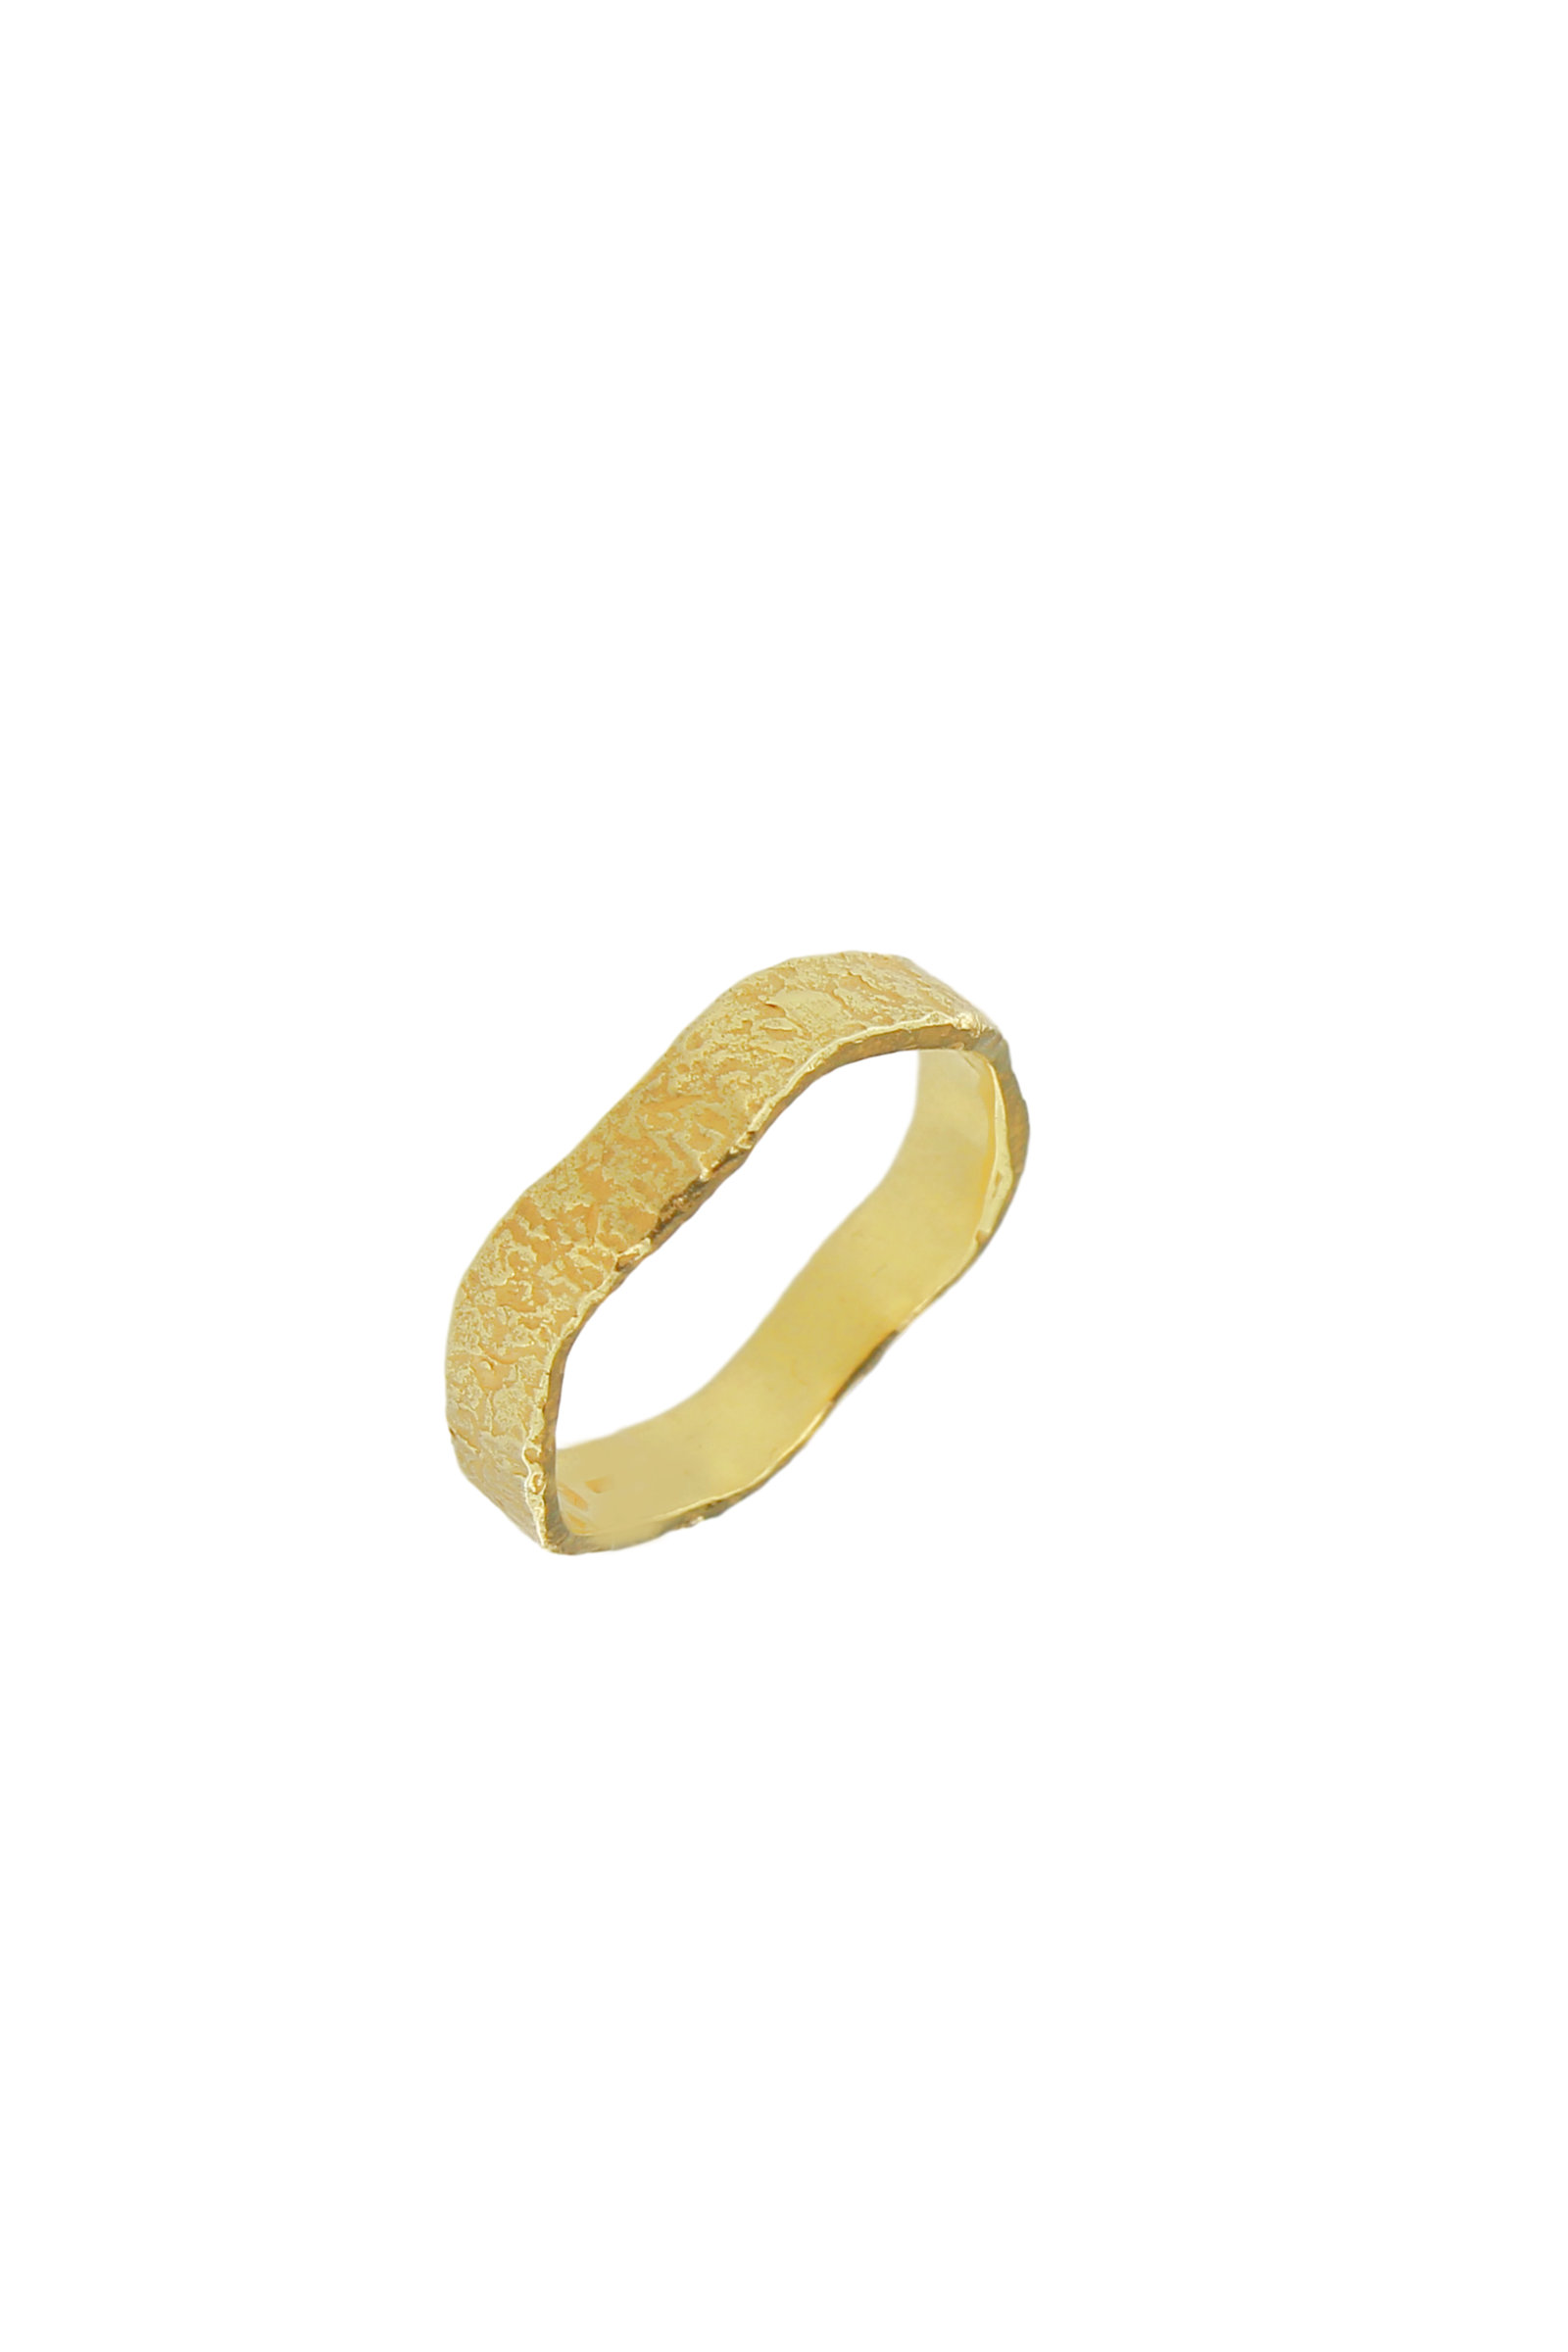 SE211D-18-Kt-Yellow-Gold-Band-Ring-1